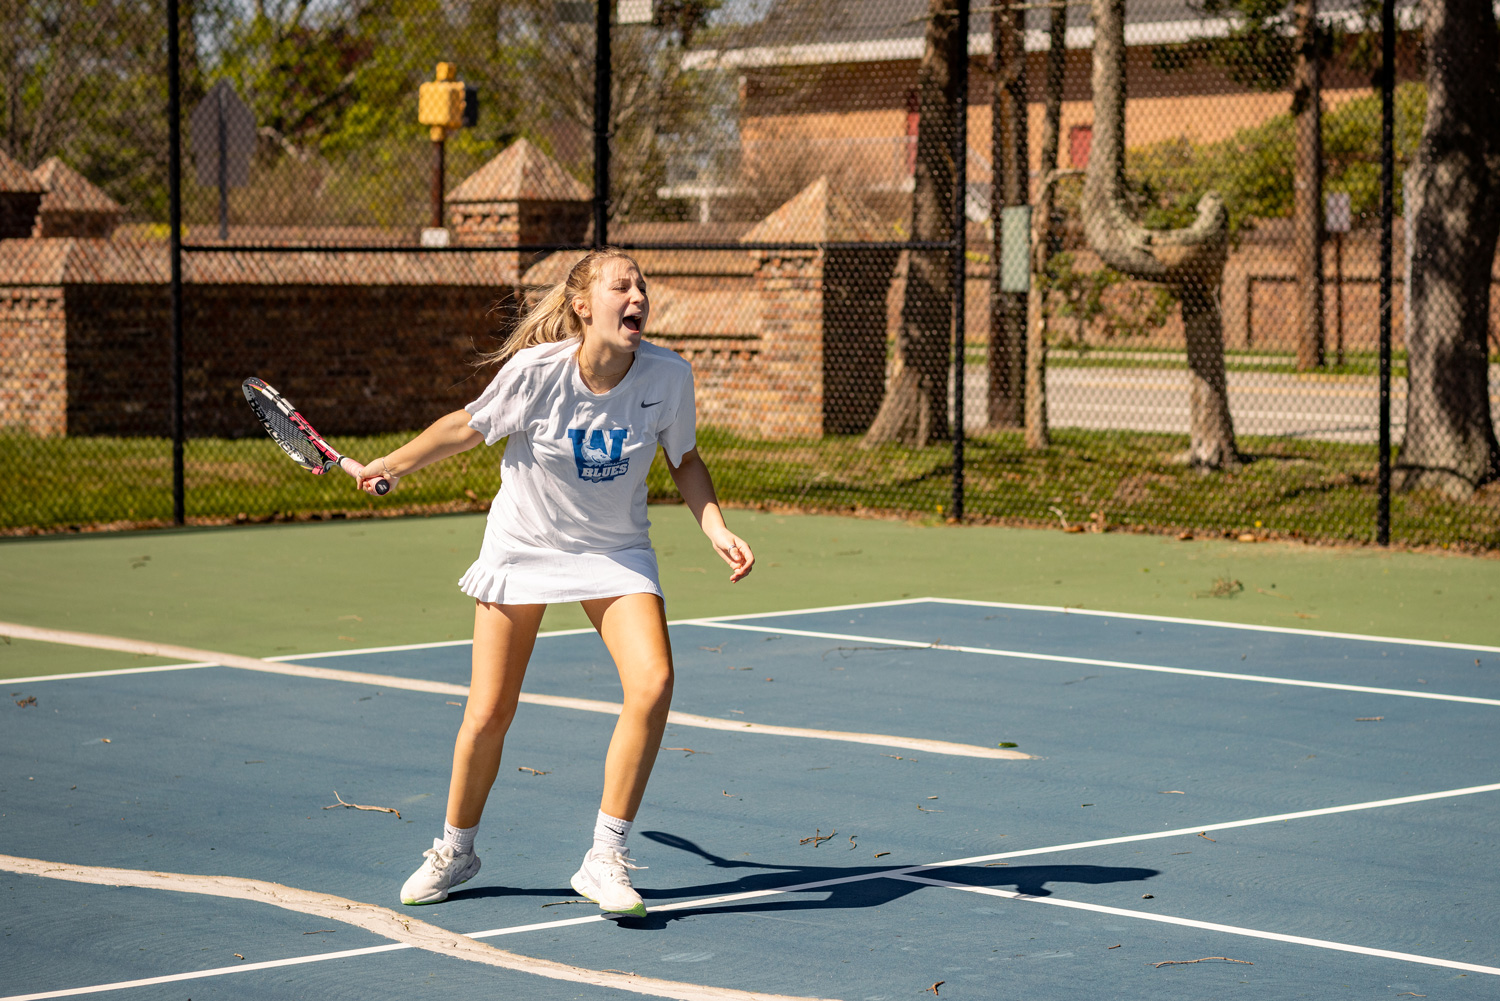 student tennis player swinging on court